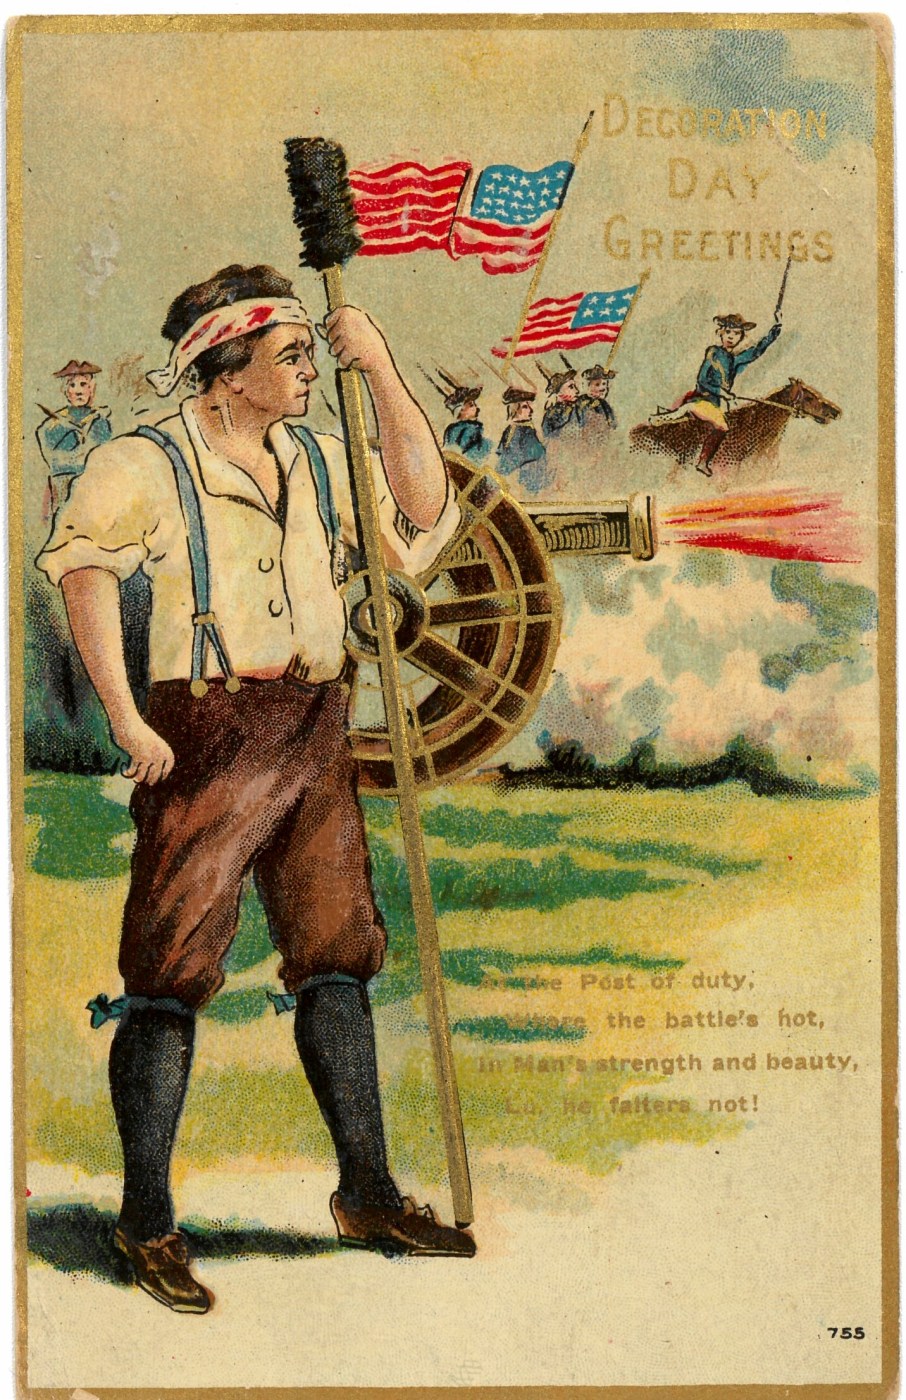 “Decoration Day Greetings,” gold highlights, cancelled May 30, 1909, no publisher. Message asks, “Do you like this one?” Revolutionary soldier in battle scene, author of verse unknown. (NCA)